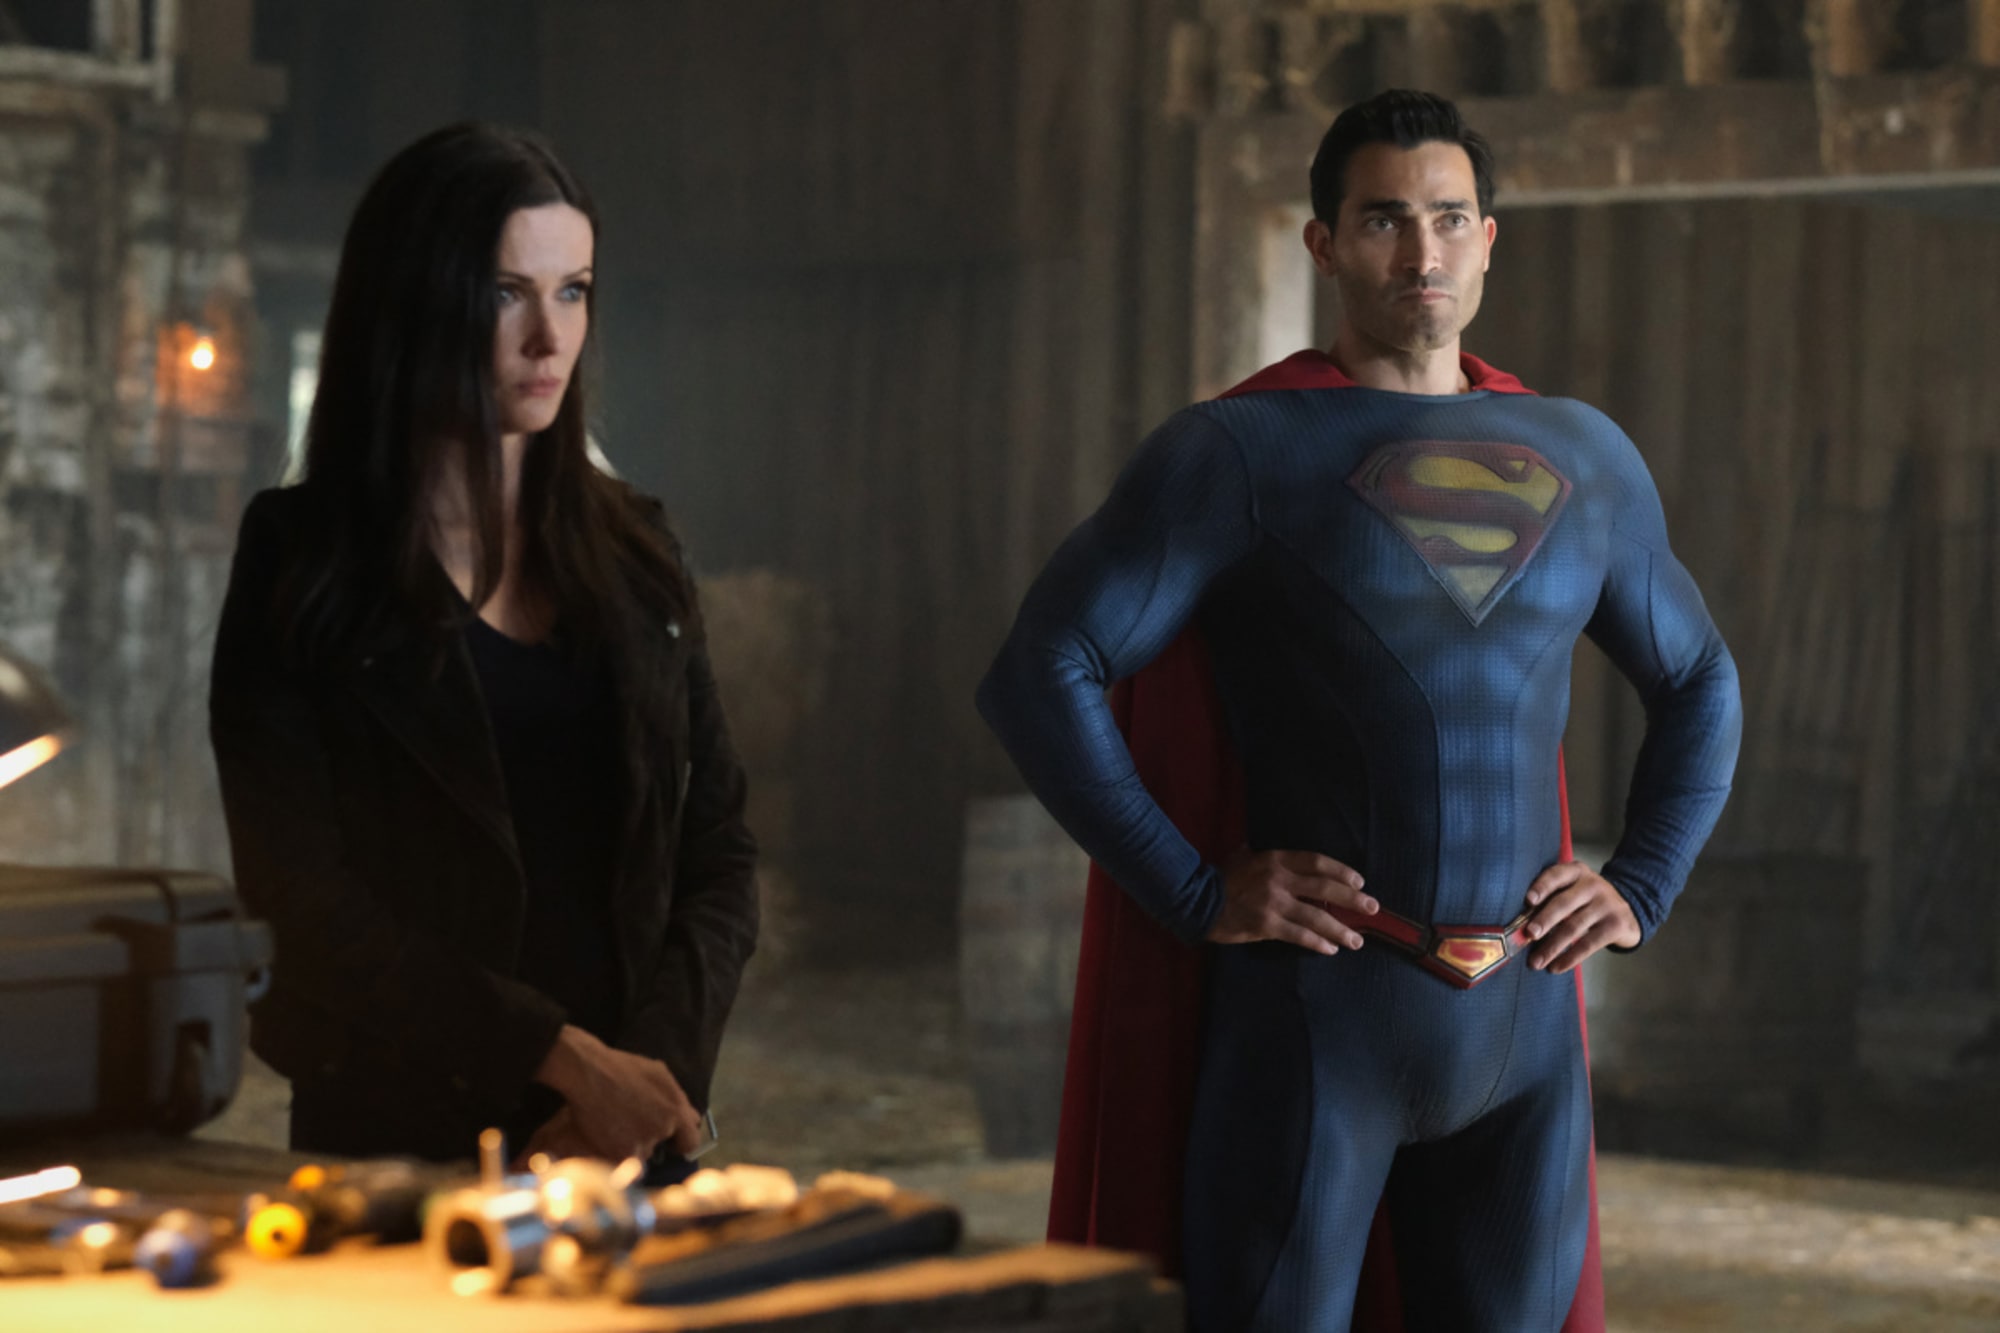 Superman and Lois. 2021-Present. The CW. 